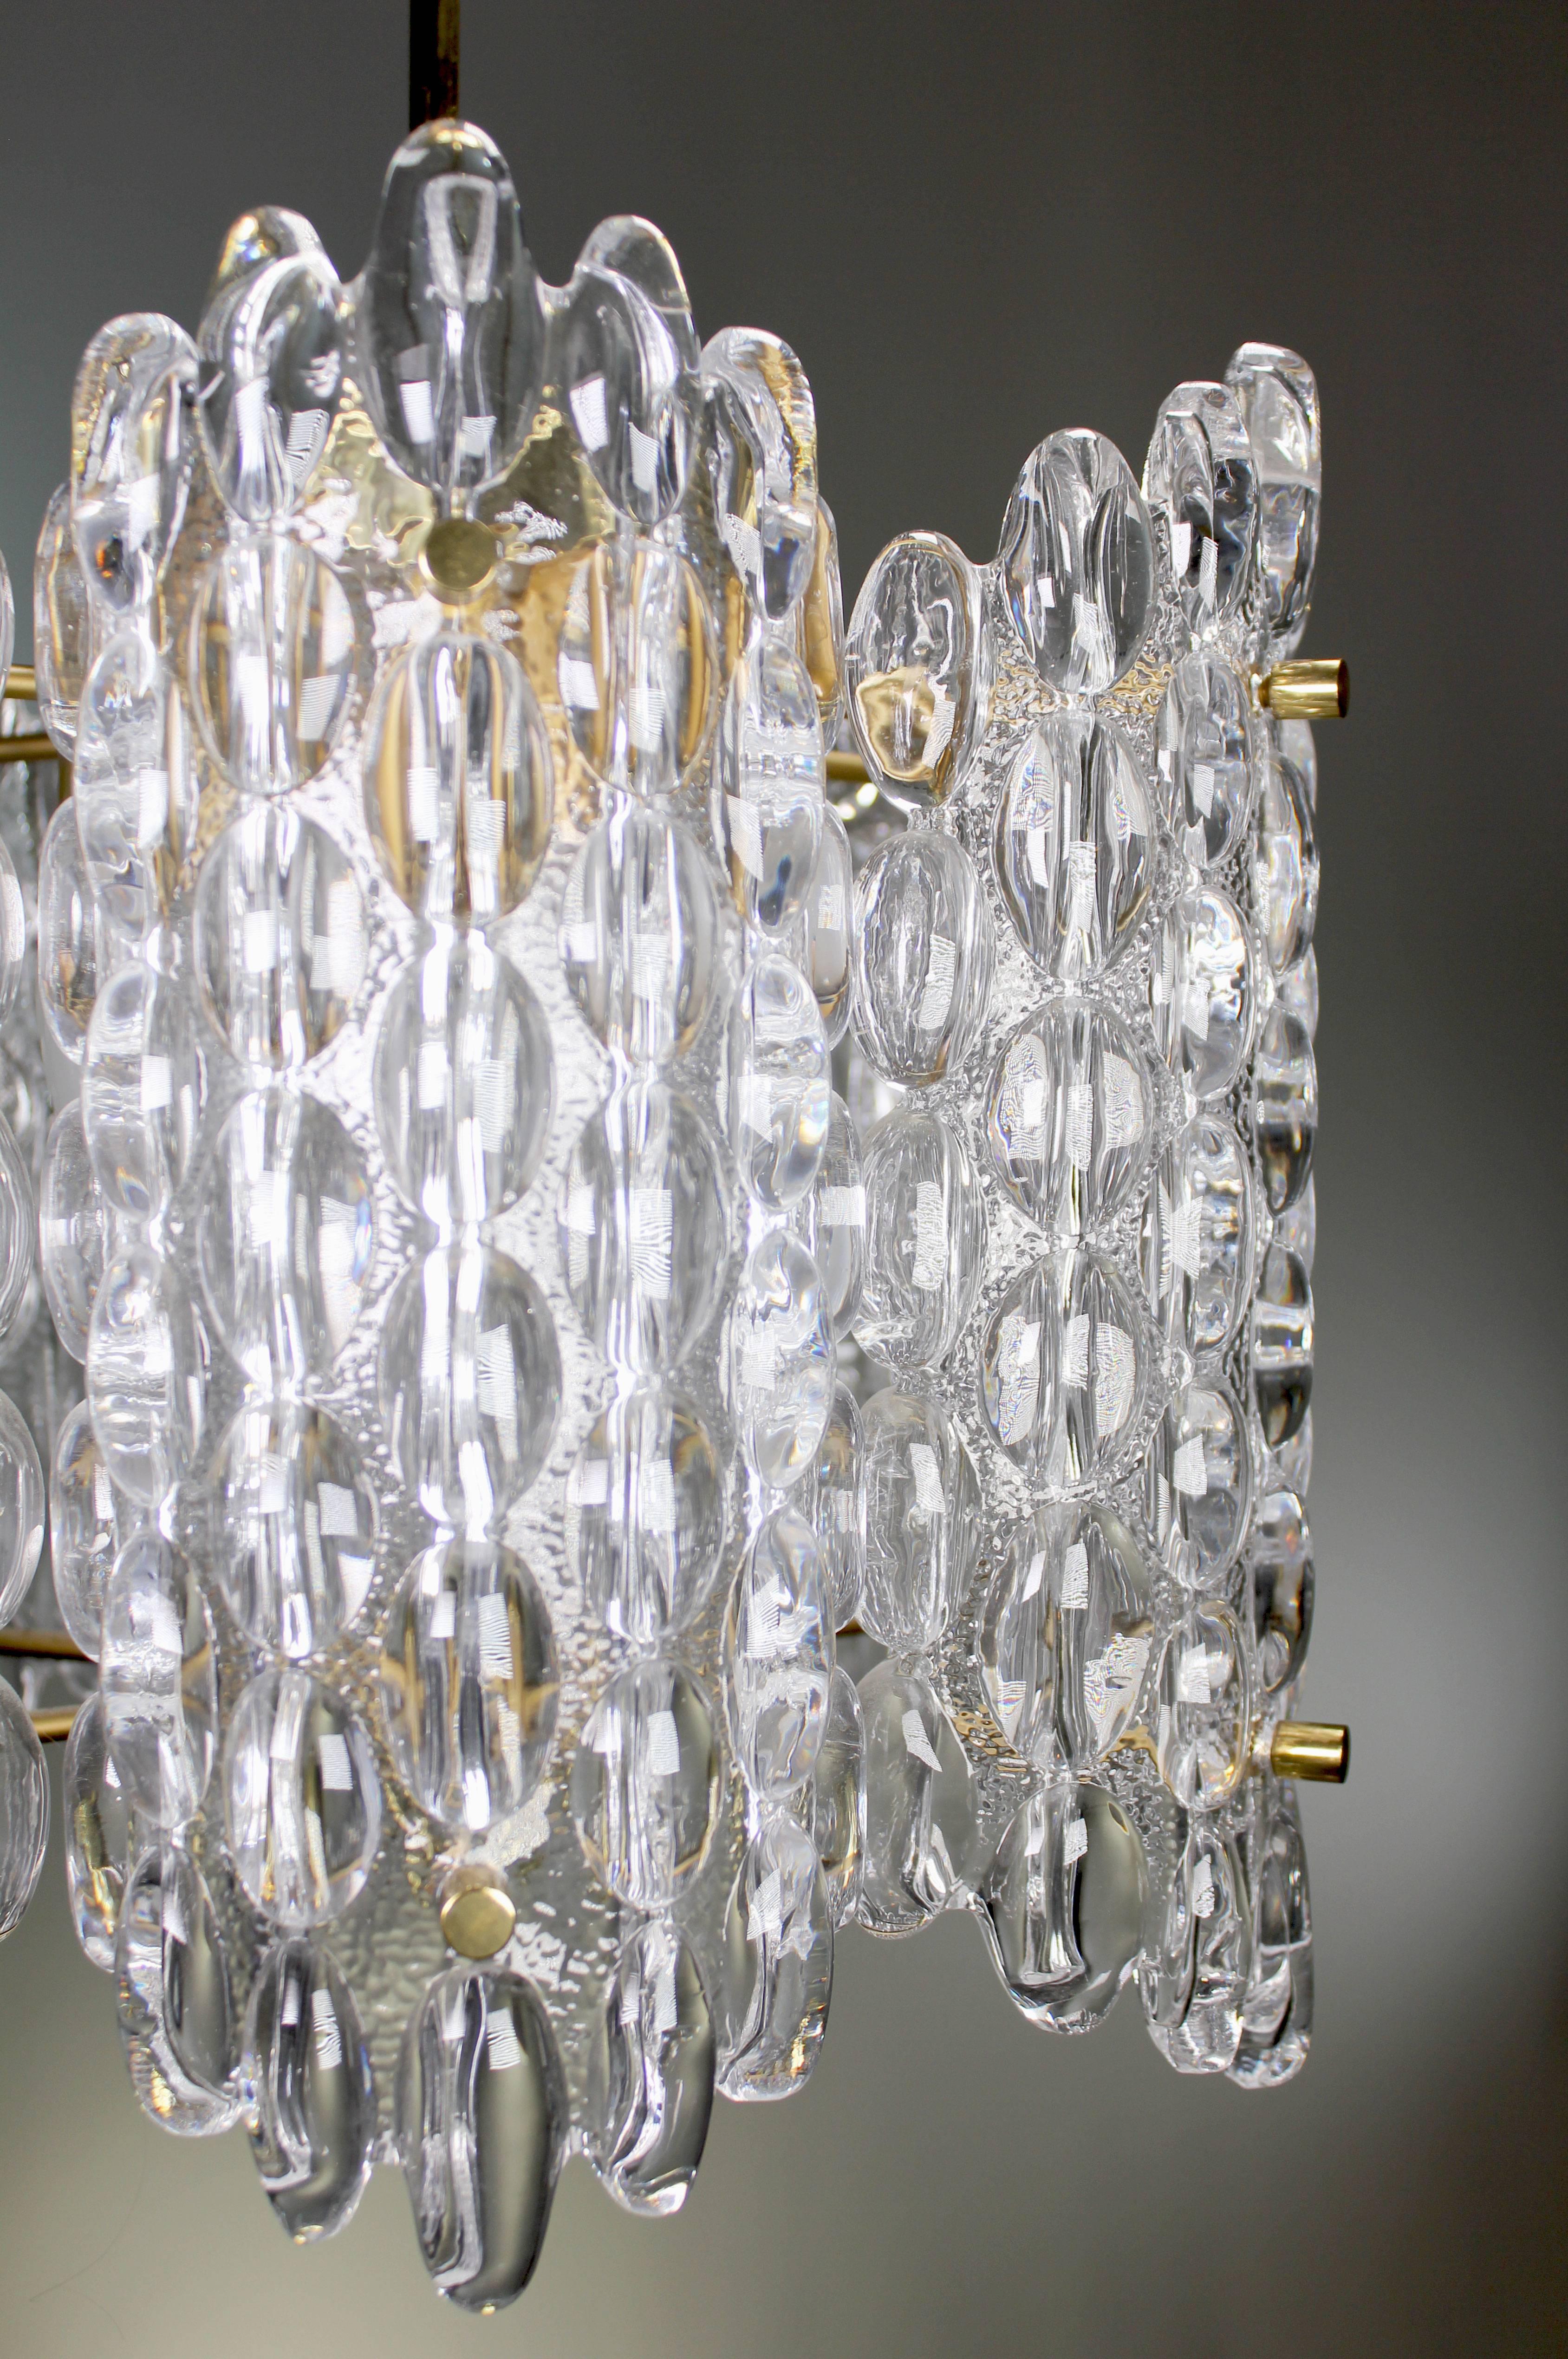 Three large iconic Swedish Mid Century Modern Orrefors chandeliers with six curved plates of bubble textured smooth clear crystal mounted on brass dividers. Original polished brass hardware, chain and canopy. By Swedish designer Carl Fagerlund for